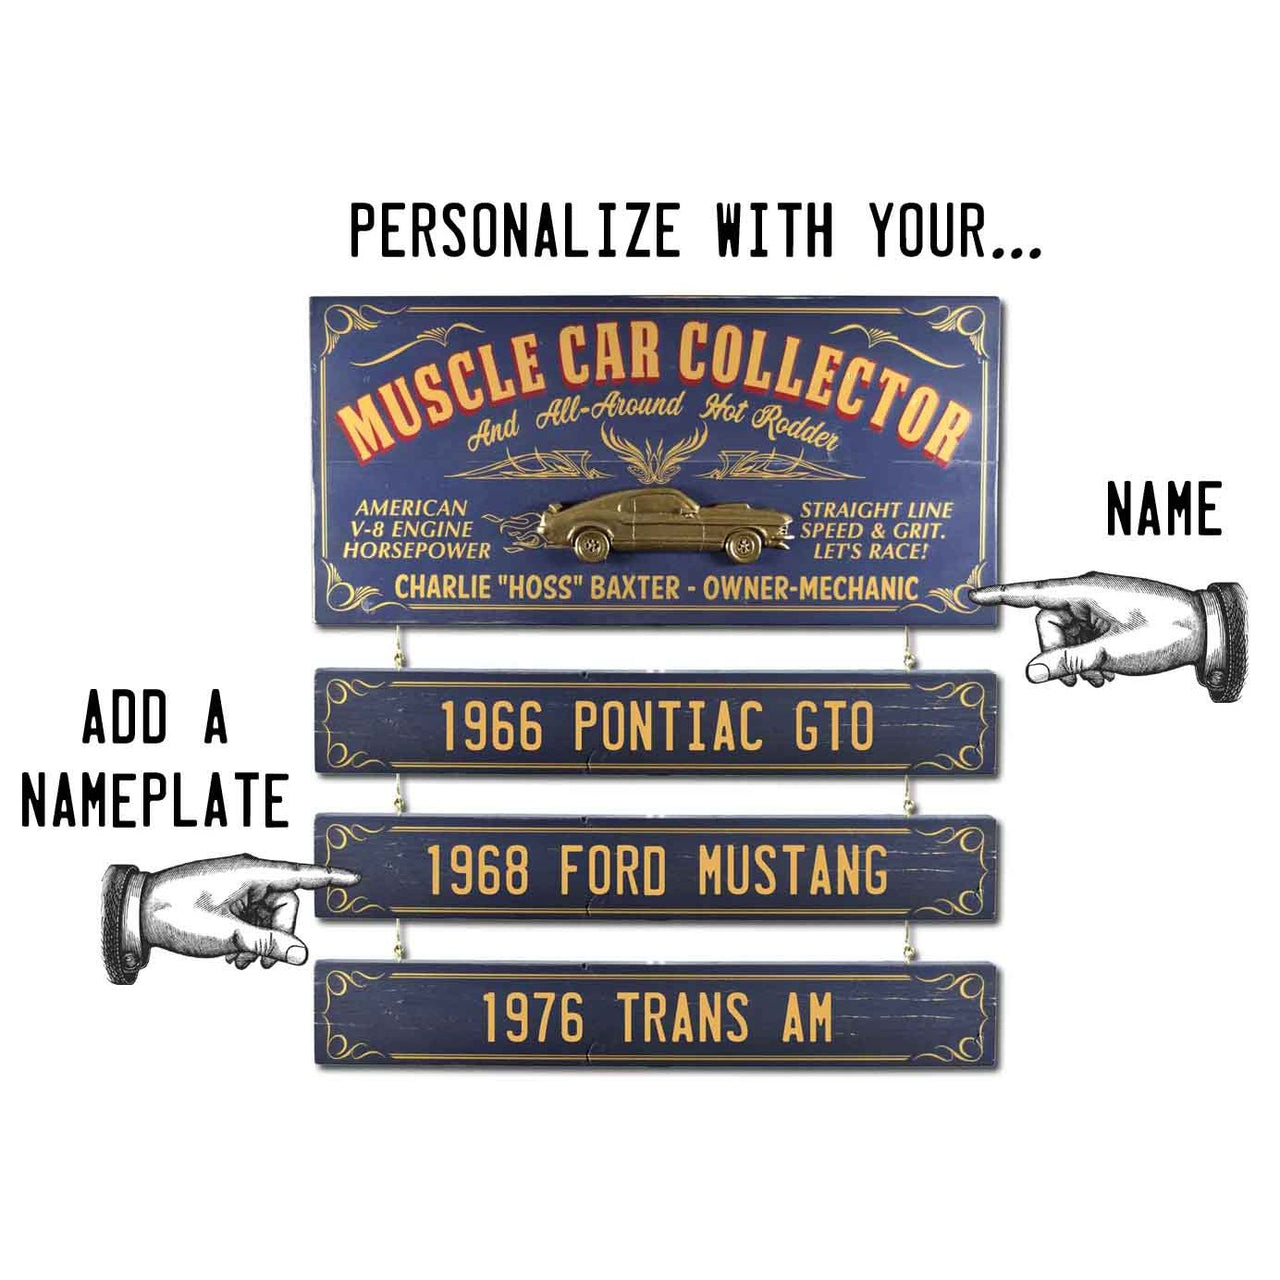 Blue and gold sign for Muscle Car Collector; raised image of car; customize name and hanging boards with car names